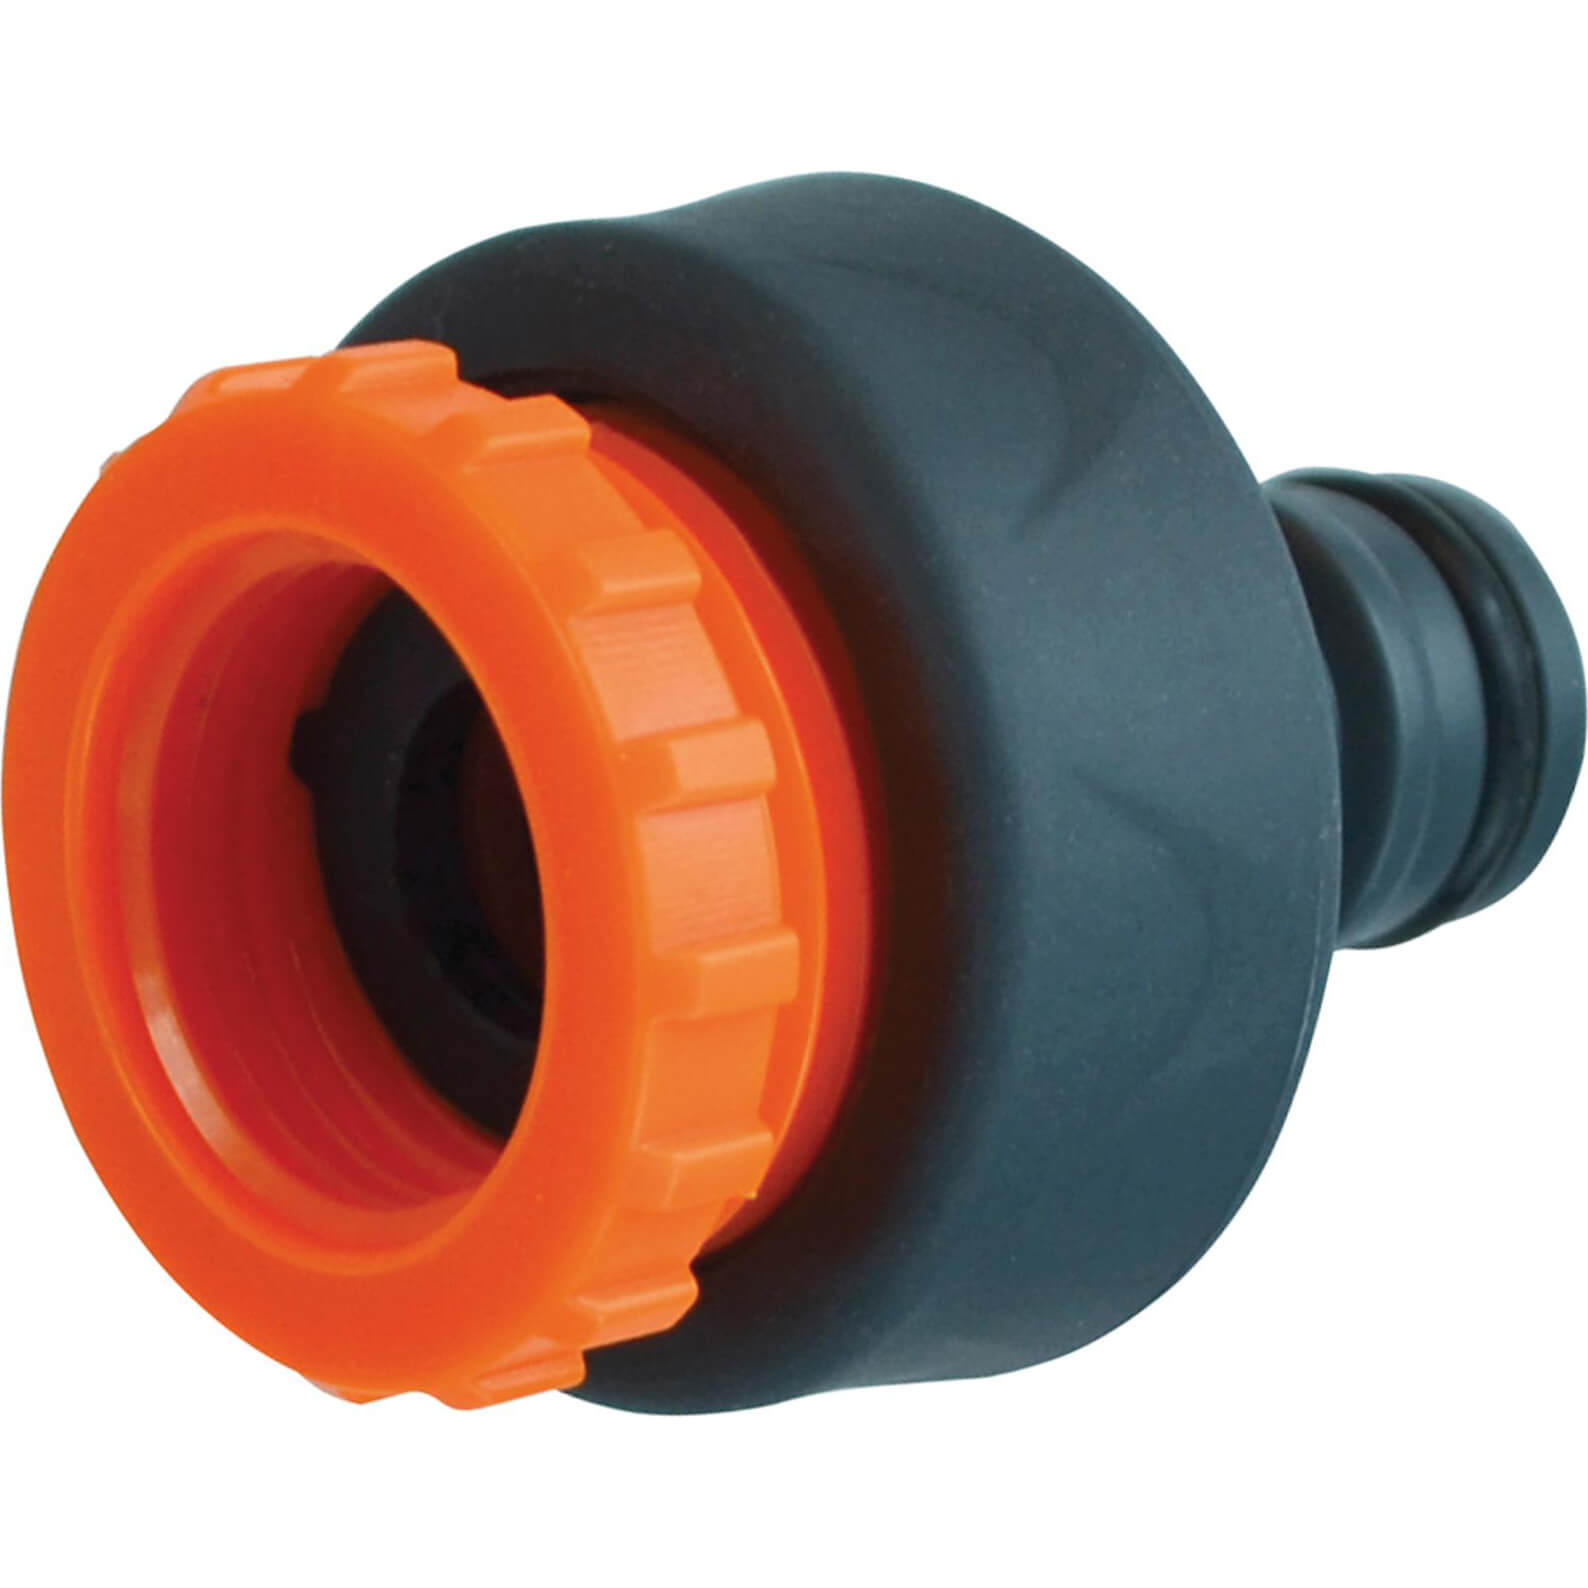 Faithfull Plastic Tap Hose Connector 1/2 and 3/4In